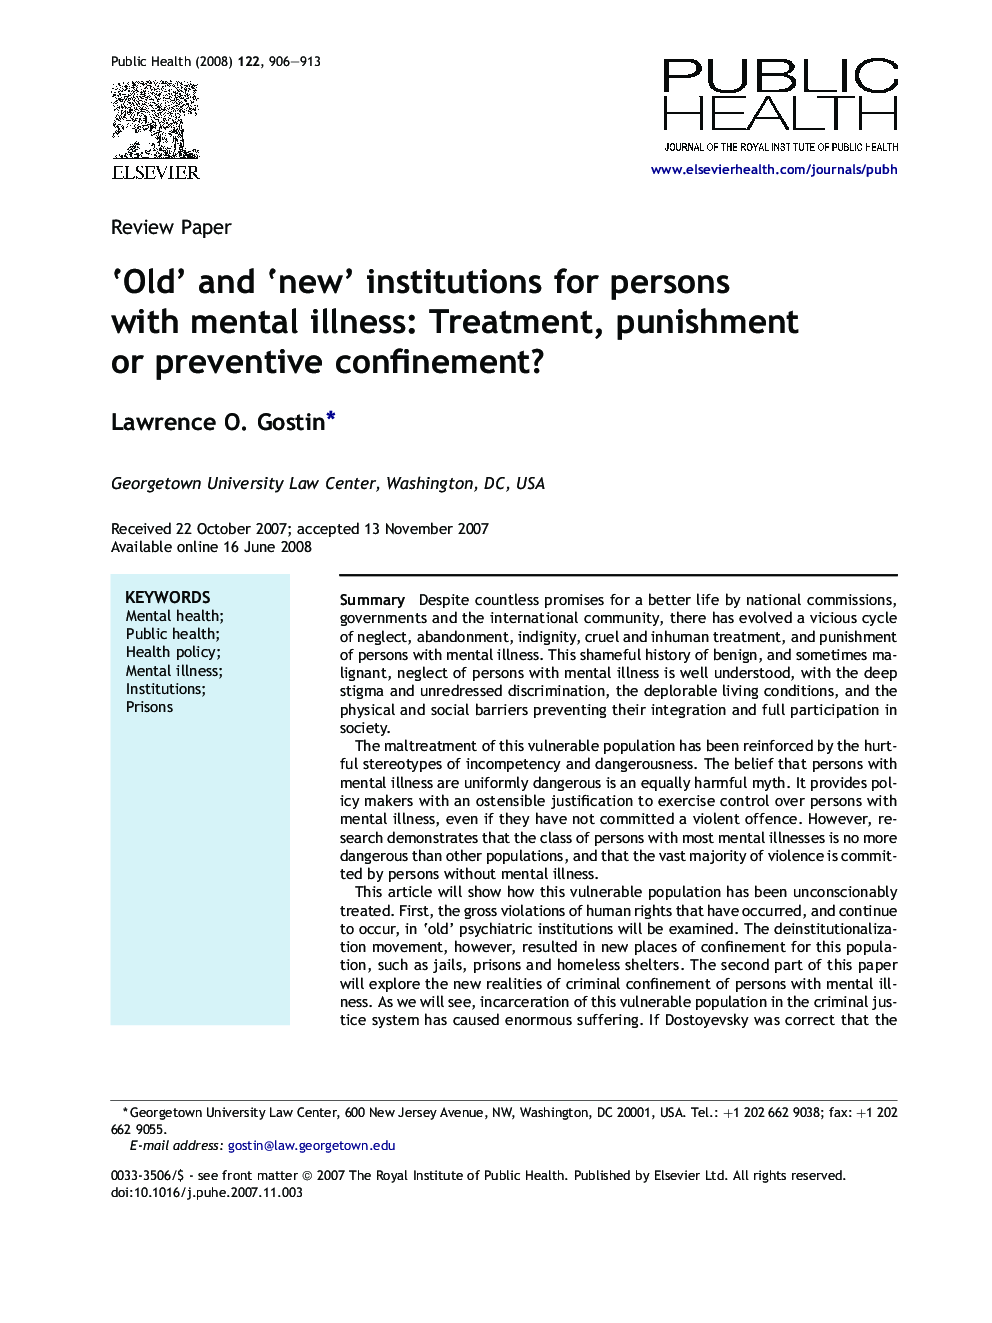 ‘Old’ and ‘new’ institutions for persons with mental illness: Treatment, punishment or preventive confinement?